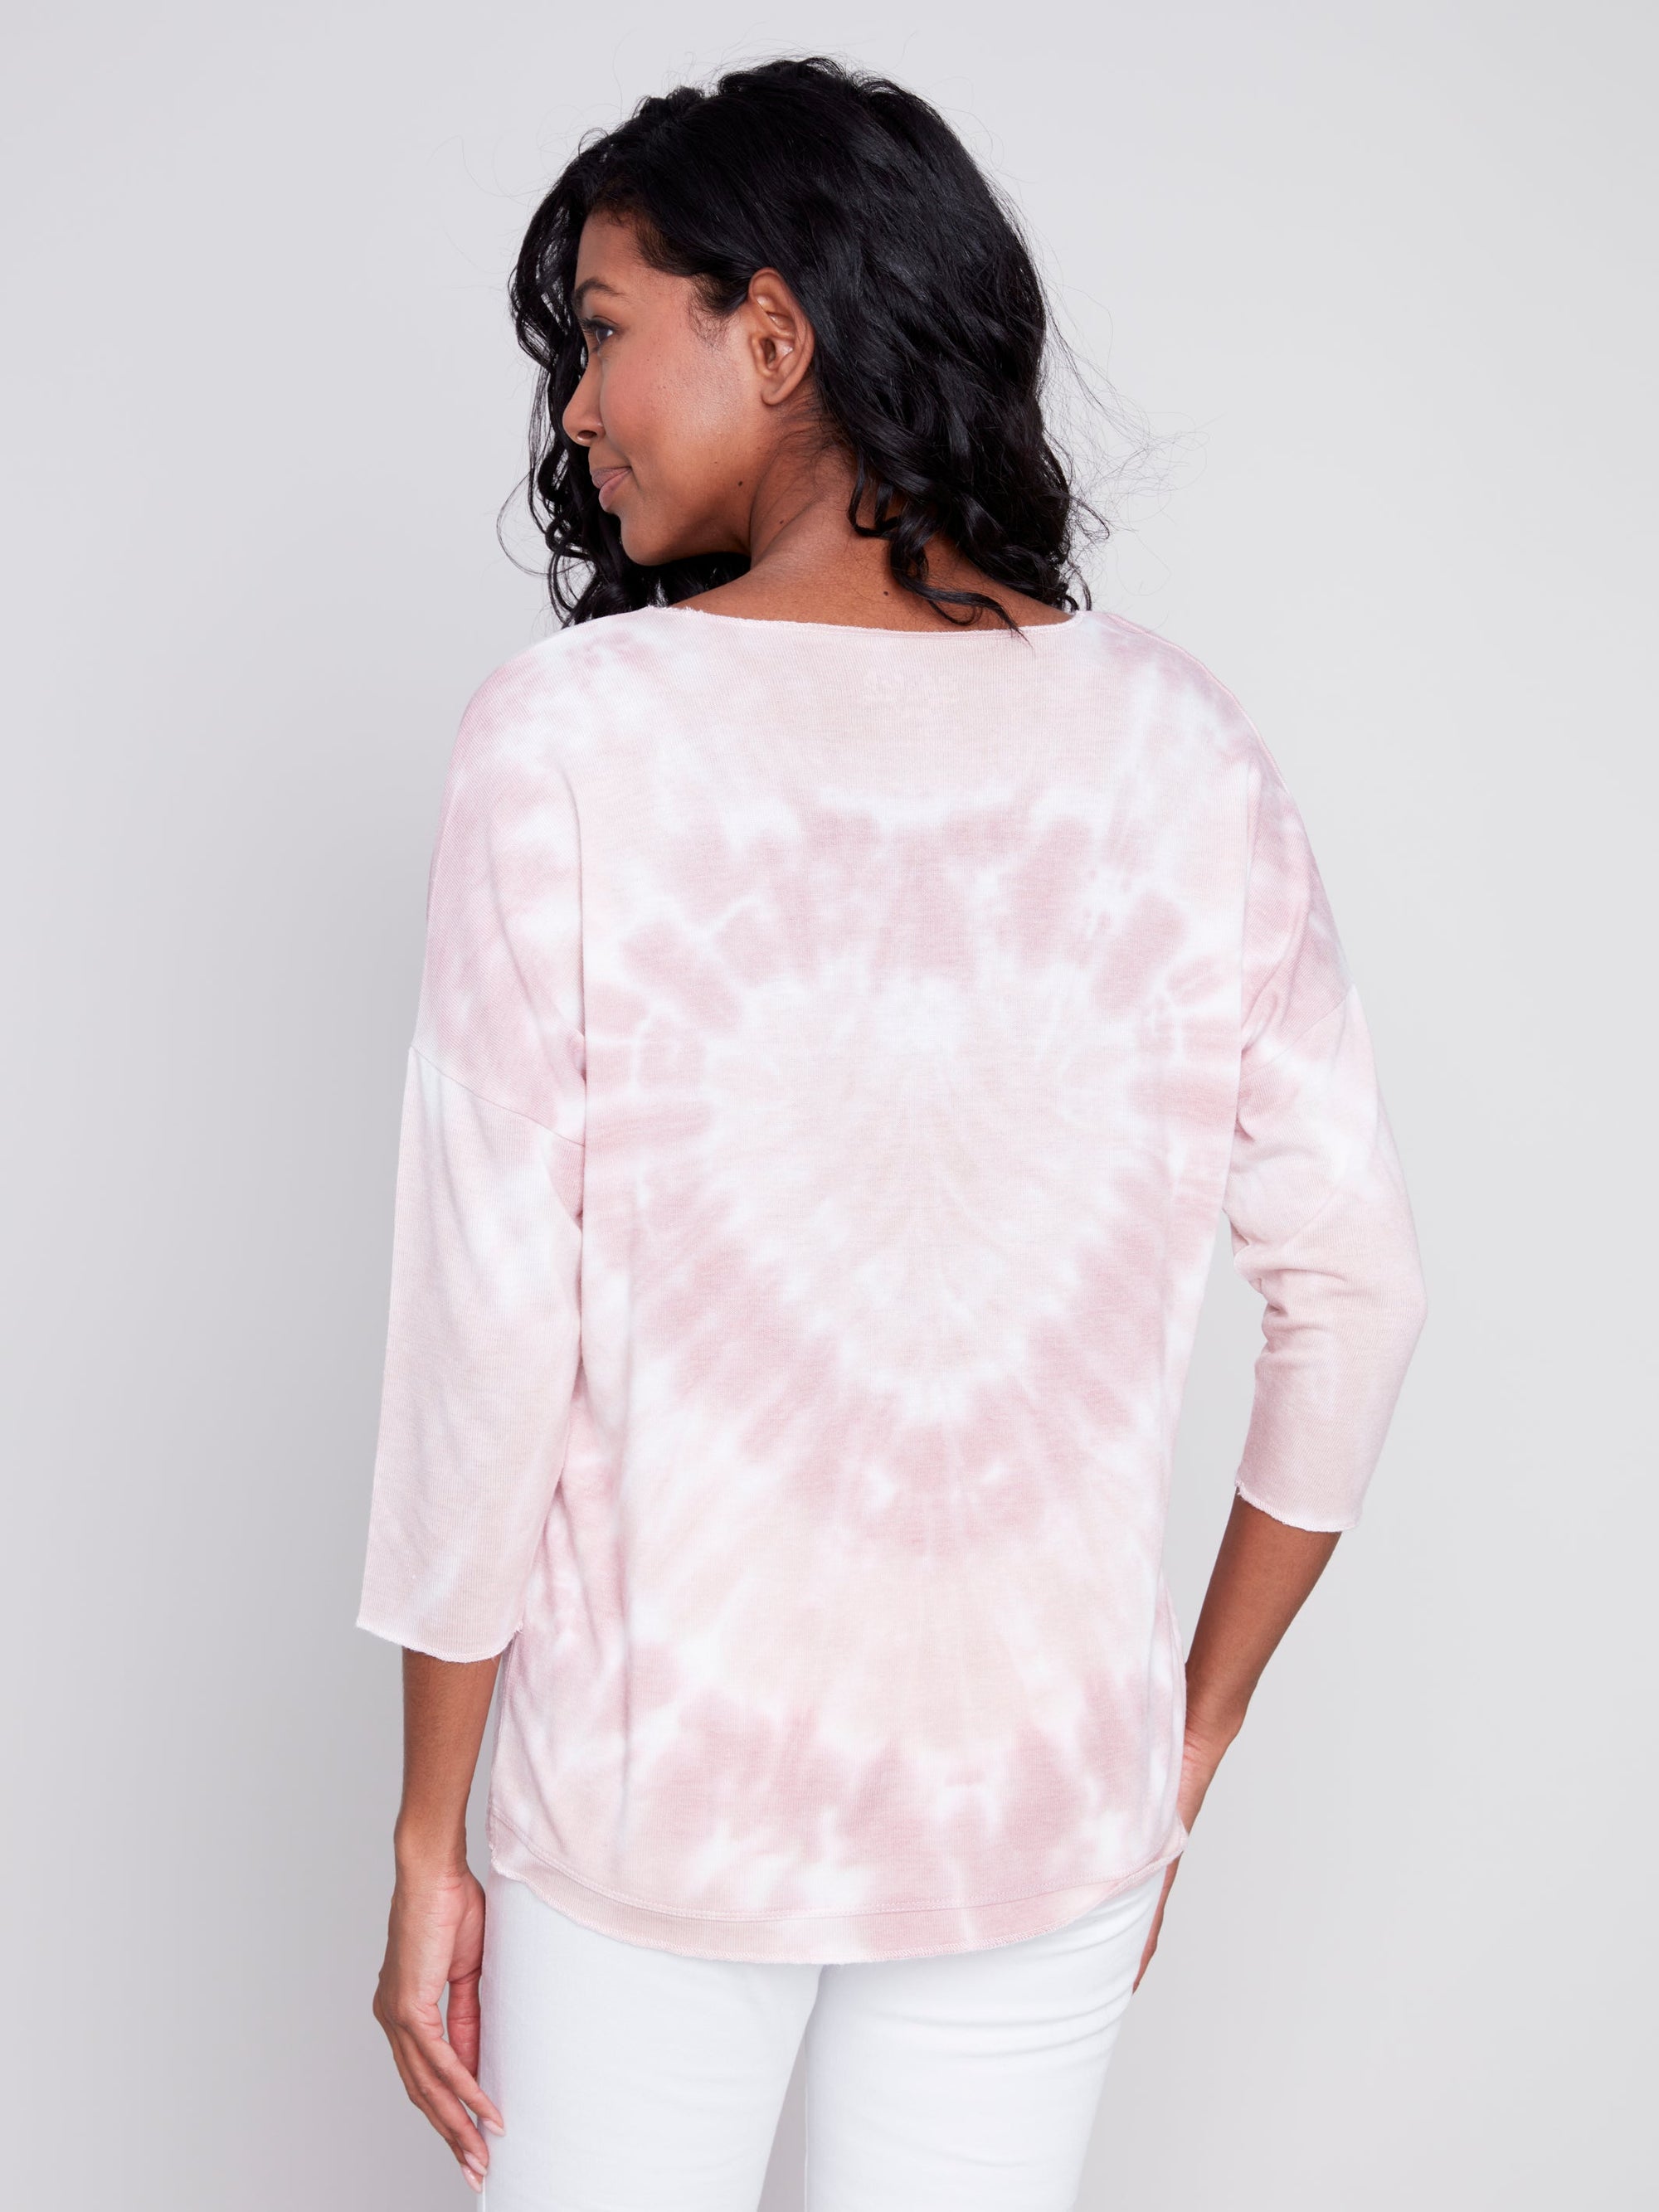 PRINTED V-NECK KNIT TOP-Tops-CHARLIE B-XSMALL-DUSTY ROSE-Coriander